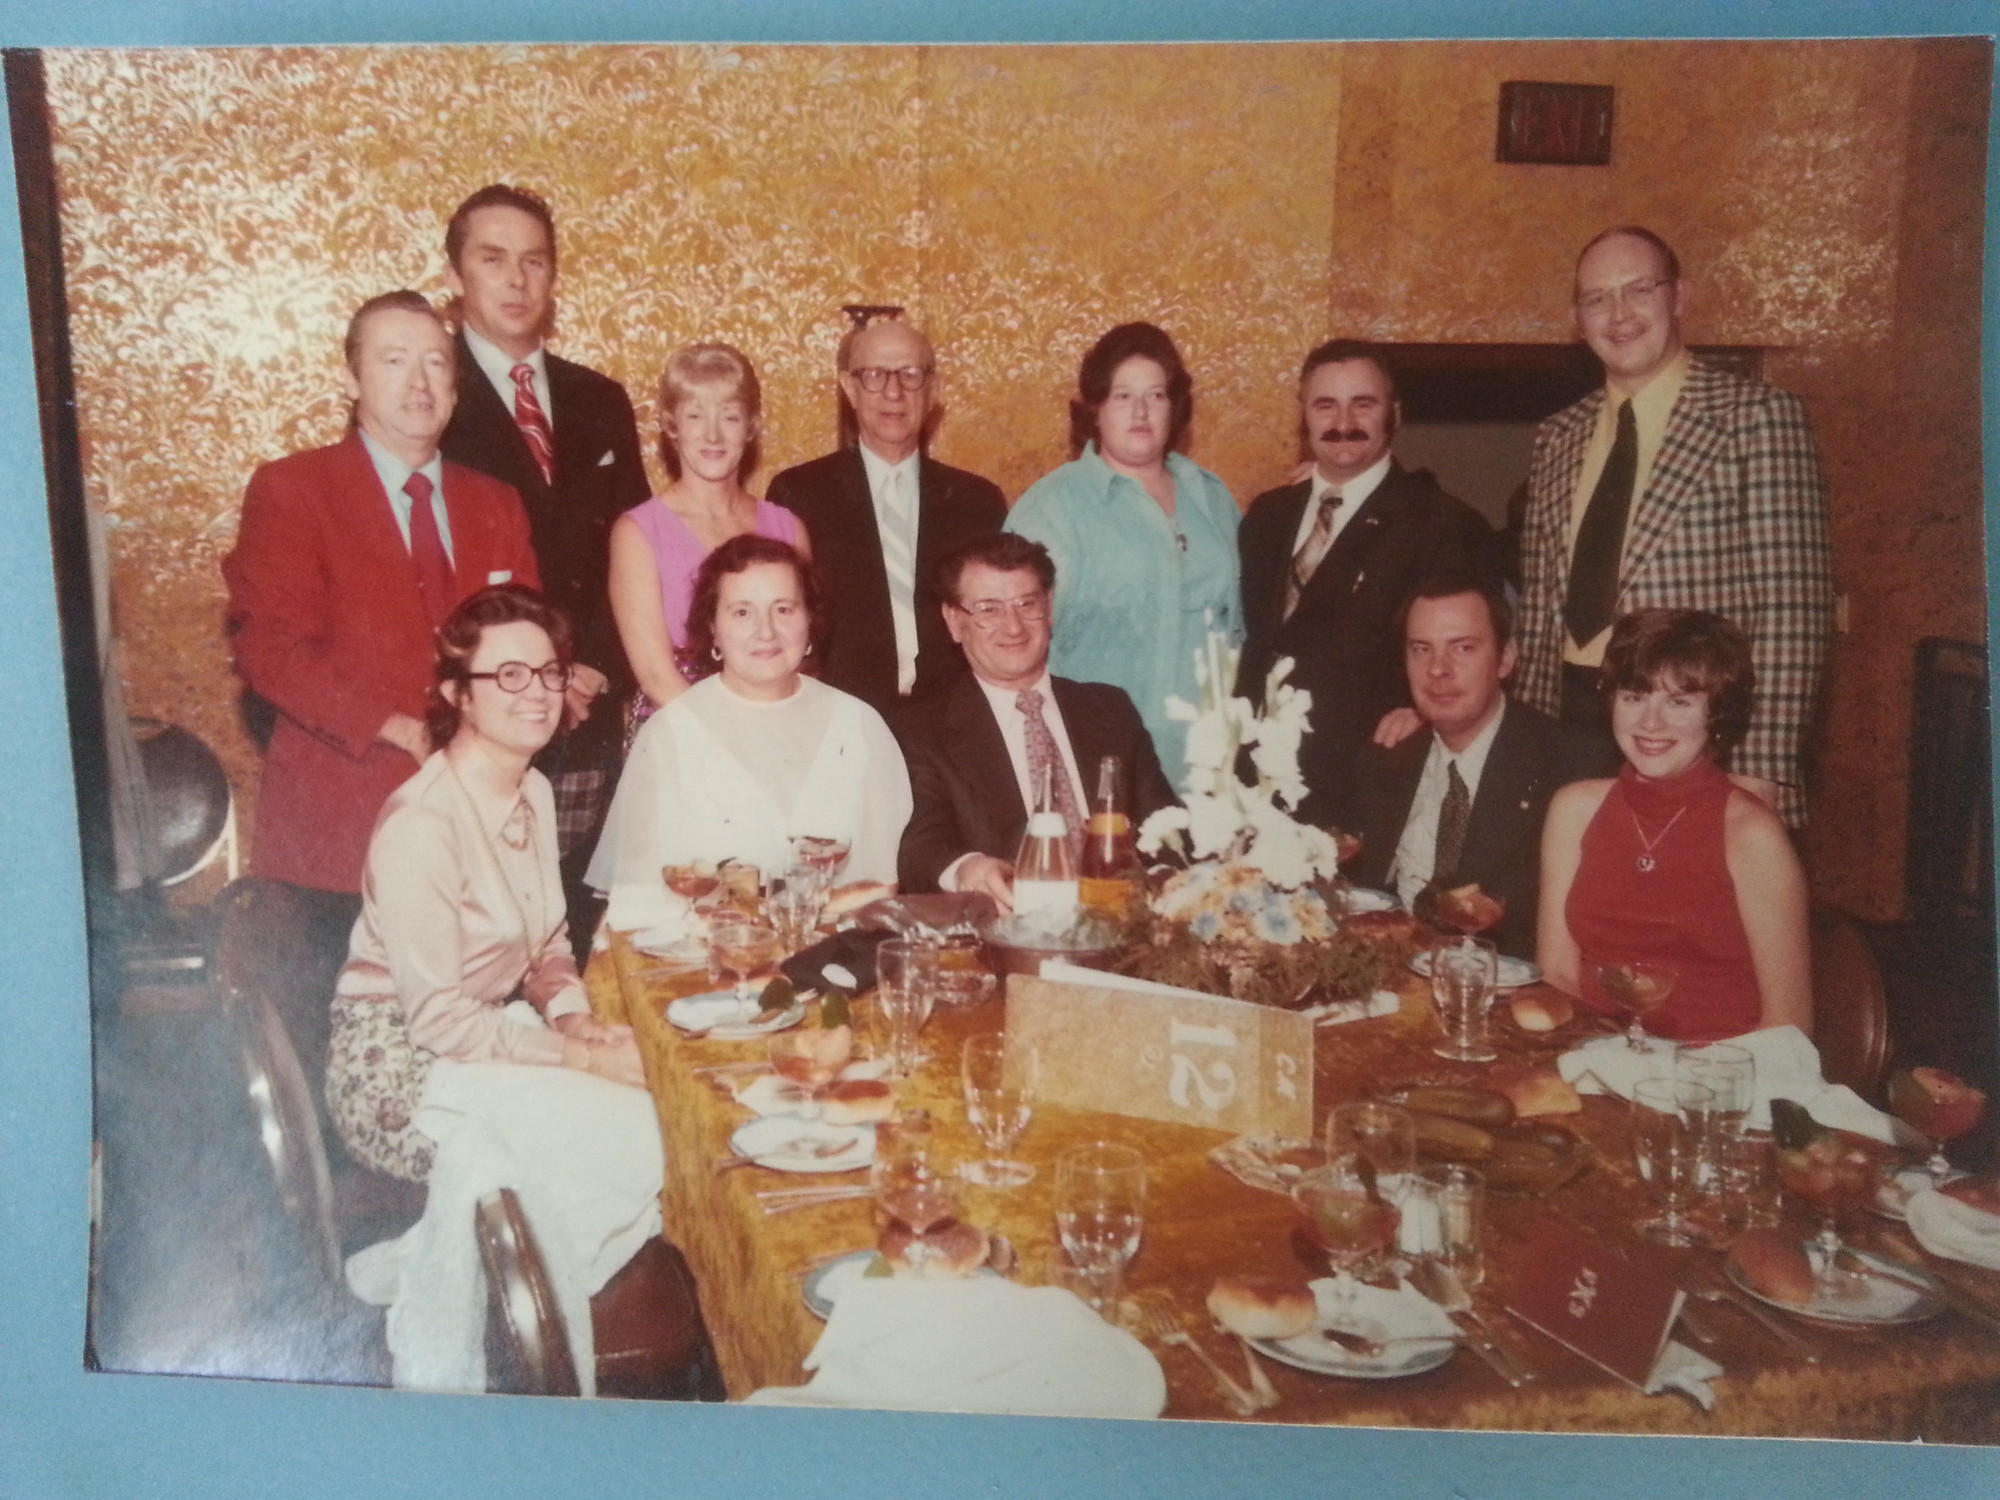 A gathering at the Malverne Volunteer Ambulance Corps’ Installation Dinner in the early 1970s. Standing, from left, were William Ryan, Rich and Chickie O’Toole, Arthur Weinstein, Carol and George Sheer and Harold Peterson. Seated, from left, were Alice Ryan, Alberta and John Vuini, David Weinstein and Linda Peterson.